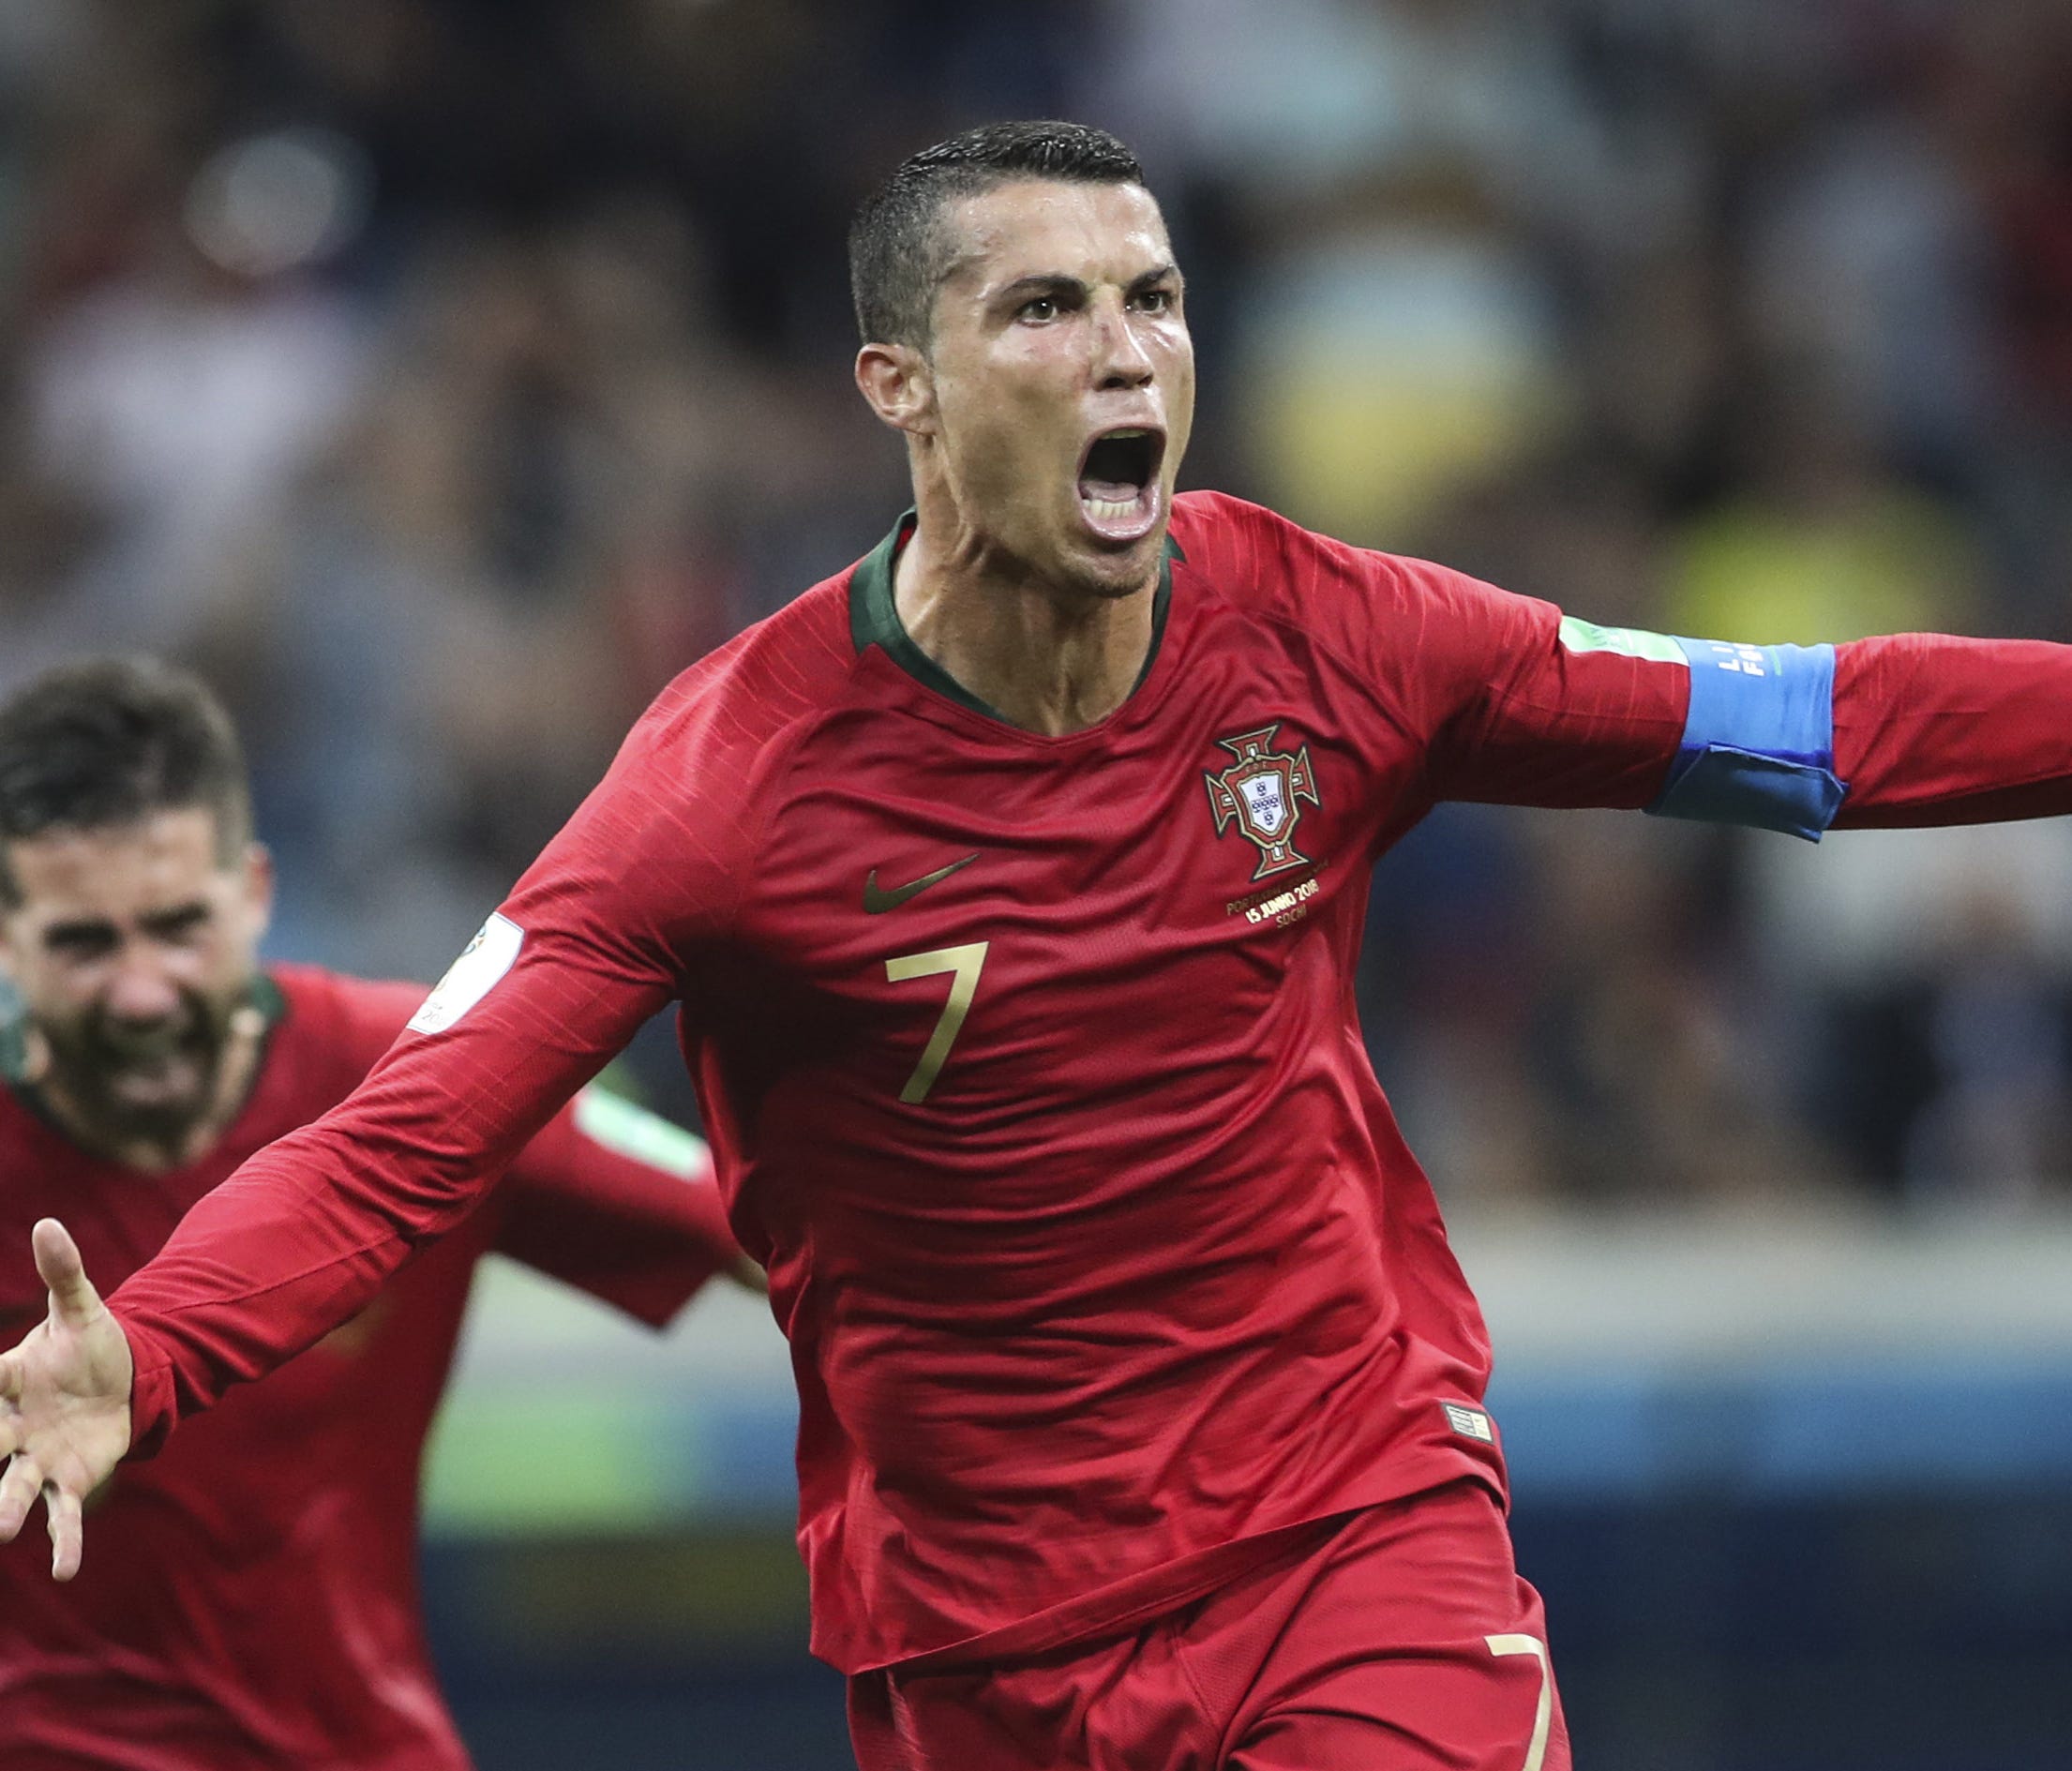 Cristiano Ronaldo celebrates a goal against Spain in the World Cup group stage.